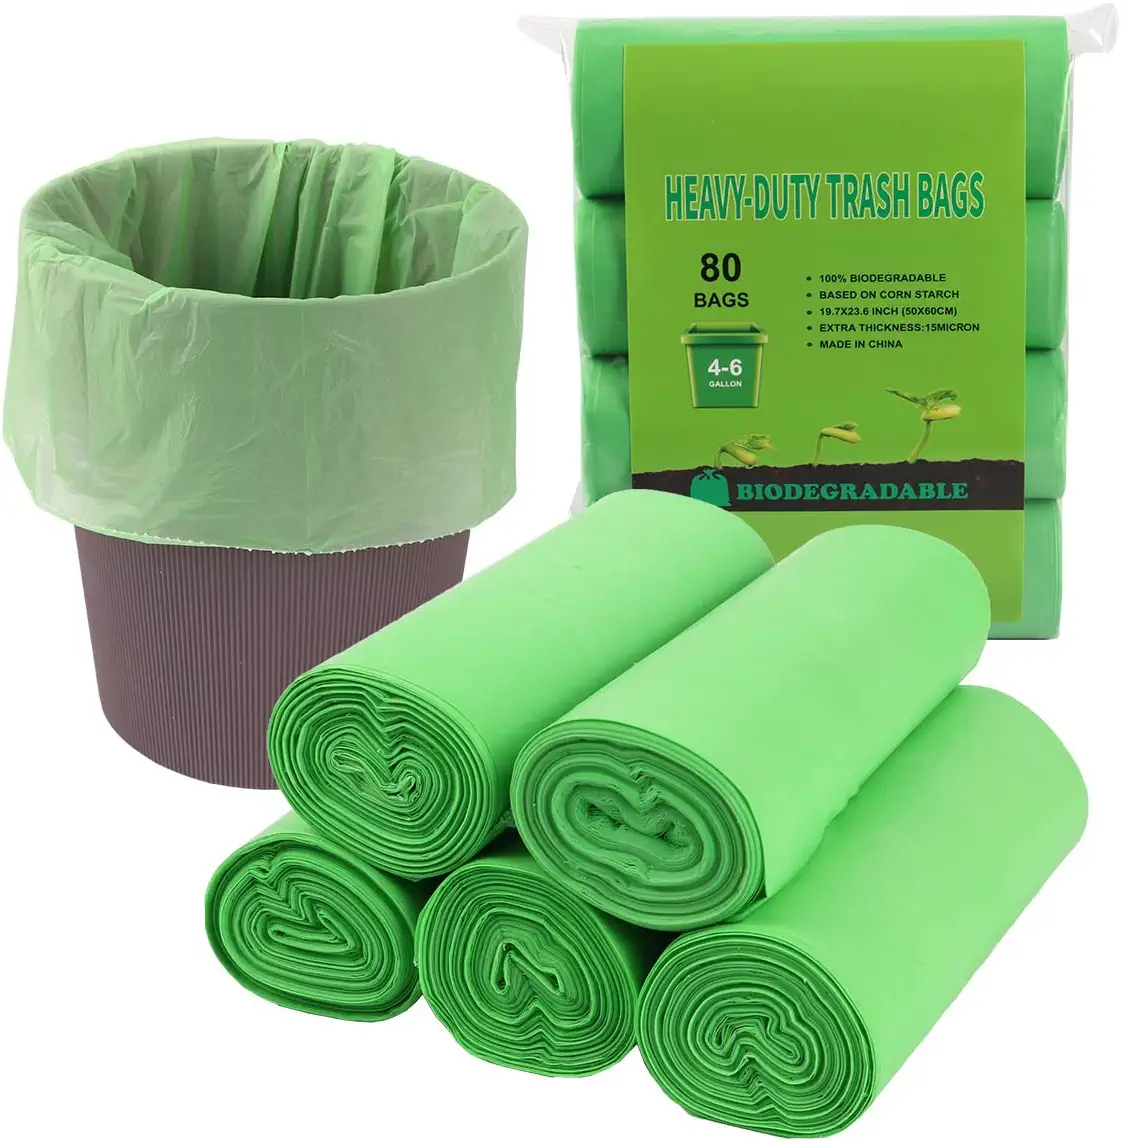 Biodegradable Small Trash Bags 2.6-4 Gallon, iPstyle Kitchen Bathroom Wastebasket Garbage Bags 80 Counts Green - 2.6-4 Gallon (17.7*19.7)